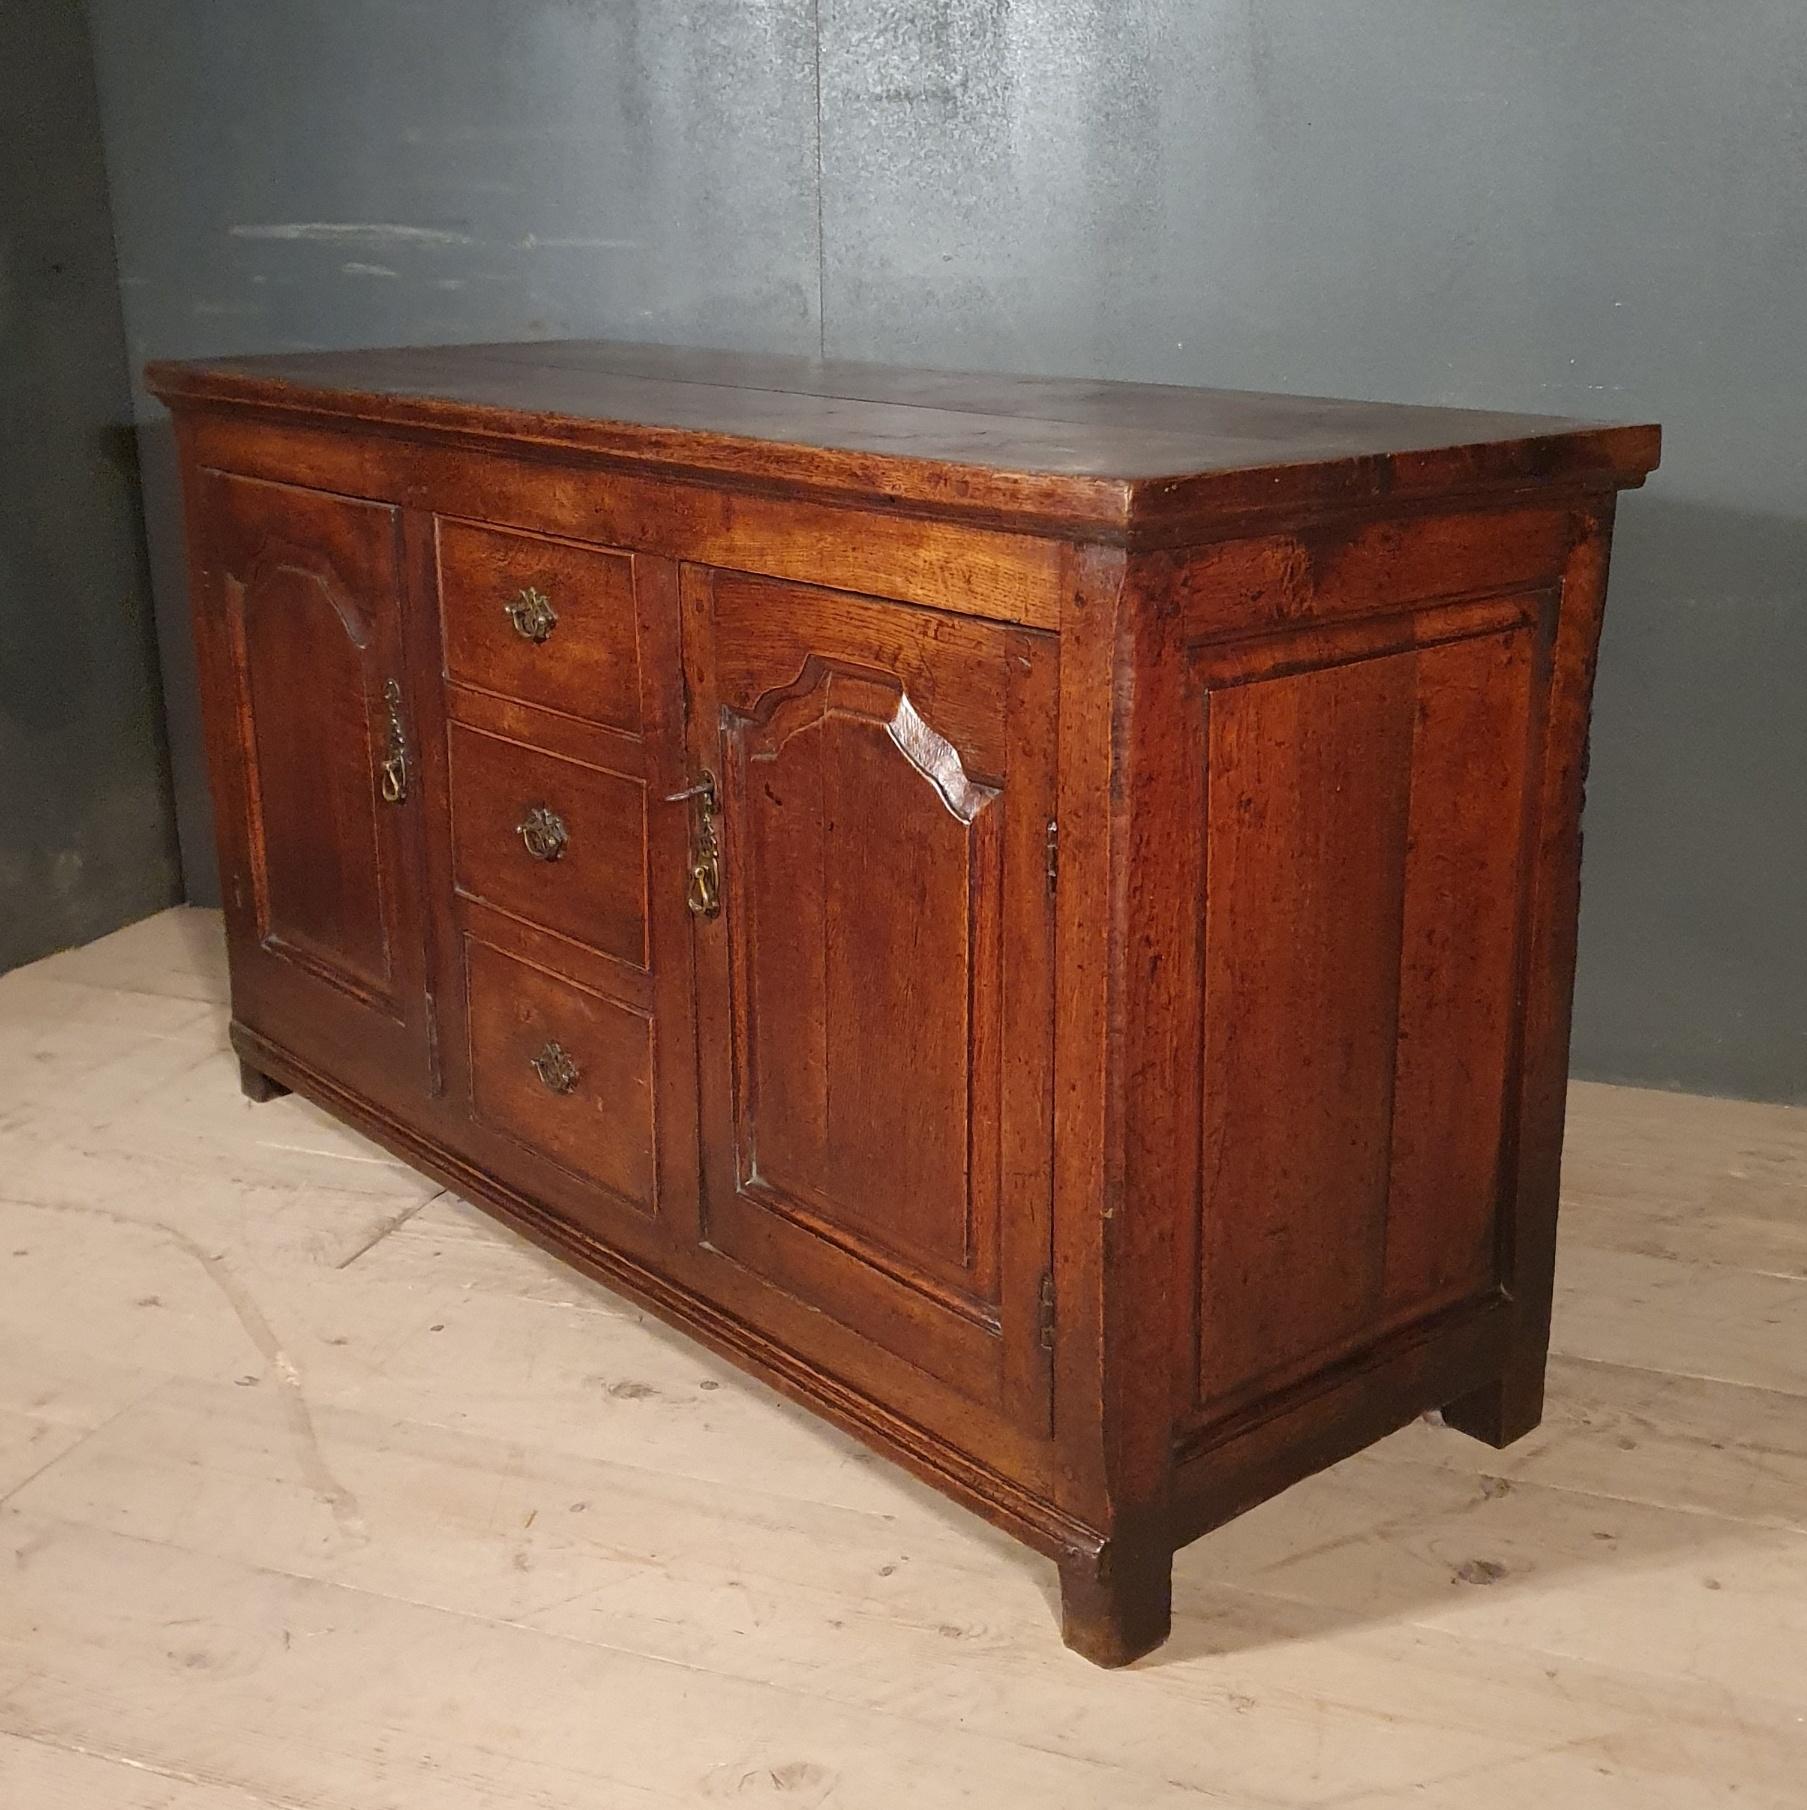 Very small 18th century English oak dresser base. Great color and size, 1760.

Dimensions
57 inches (145 cms) wide
21 inches (53 cms) deep
32 inches (81 cms) high.